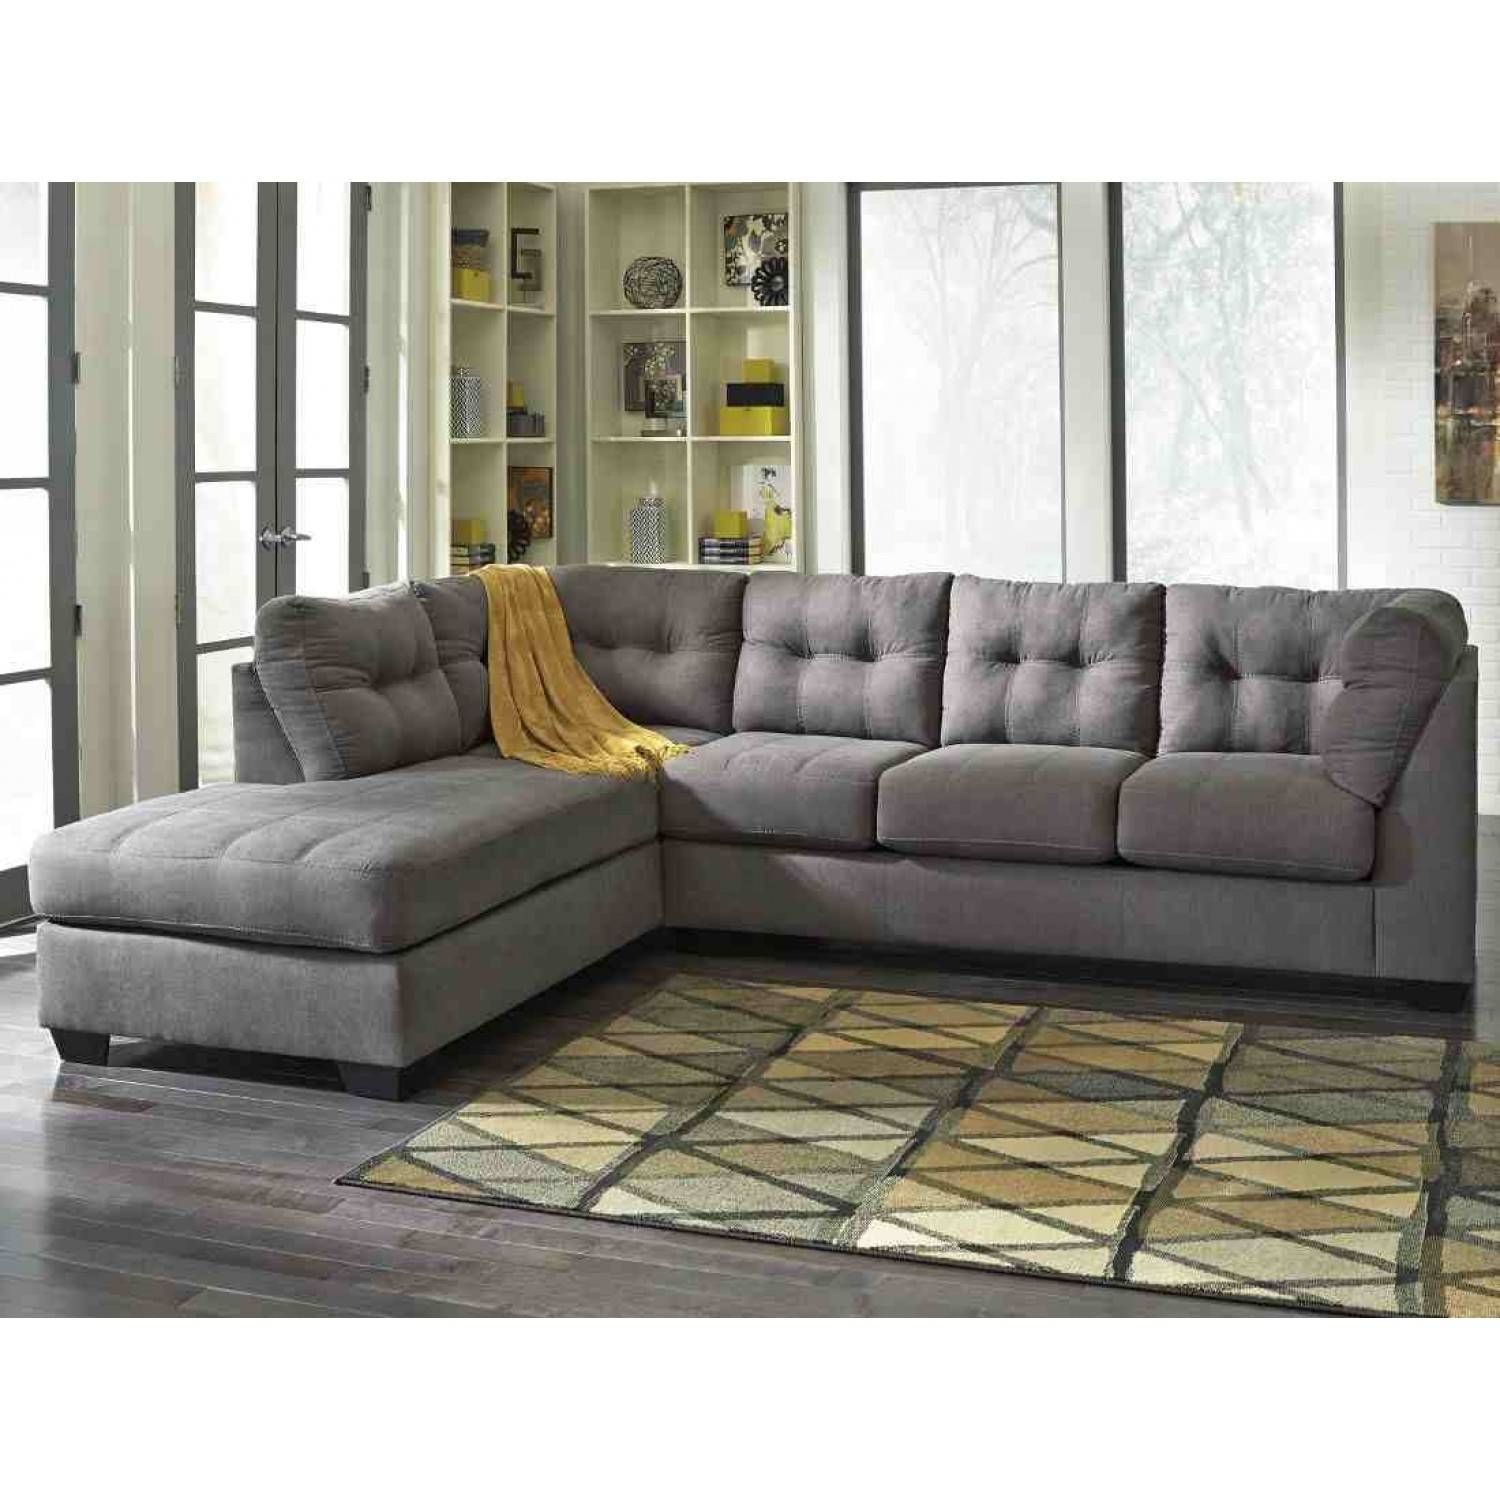 Ashley Furniture Maier Sectional In Charcoal | Local Furniture Outlet With Austin Sectional Sofa (View 6 of 30)